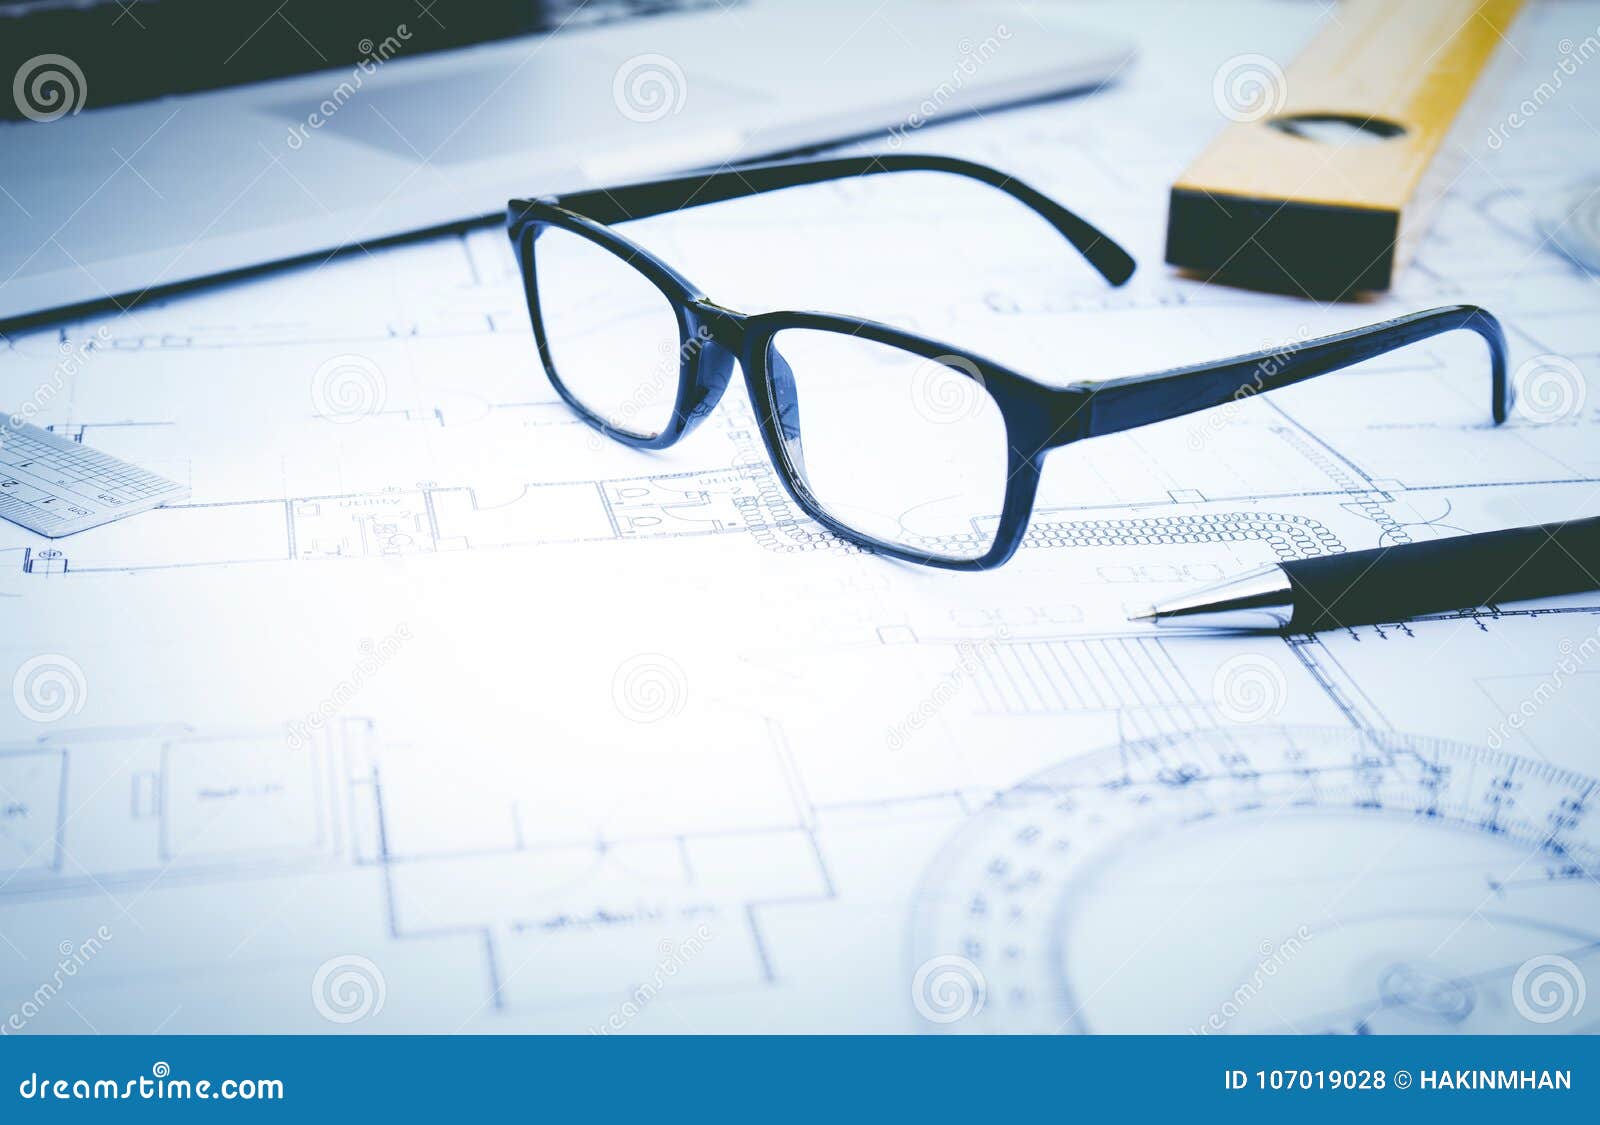 glasses on plan .concept of architecture,construction